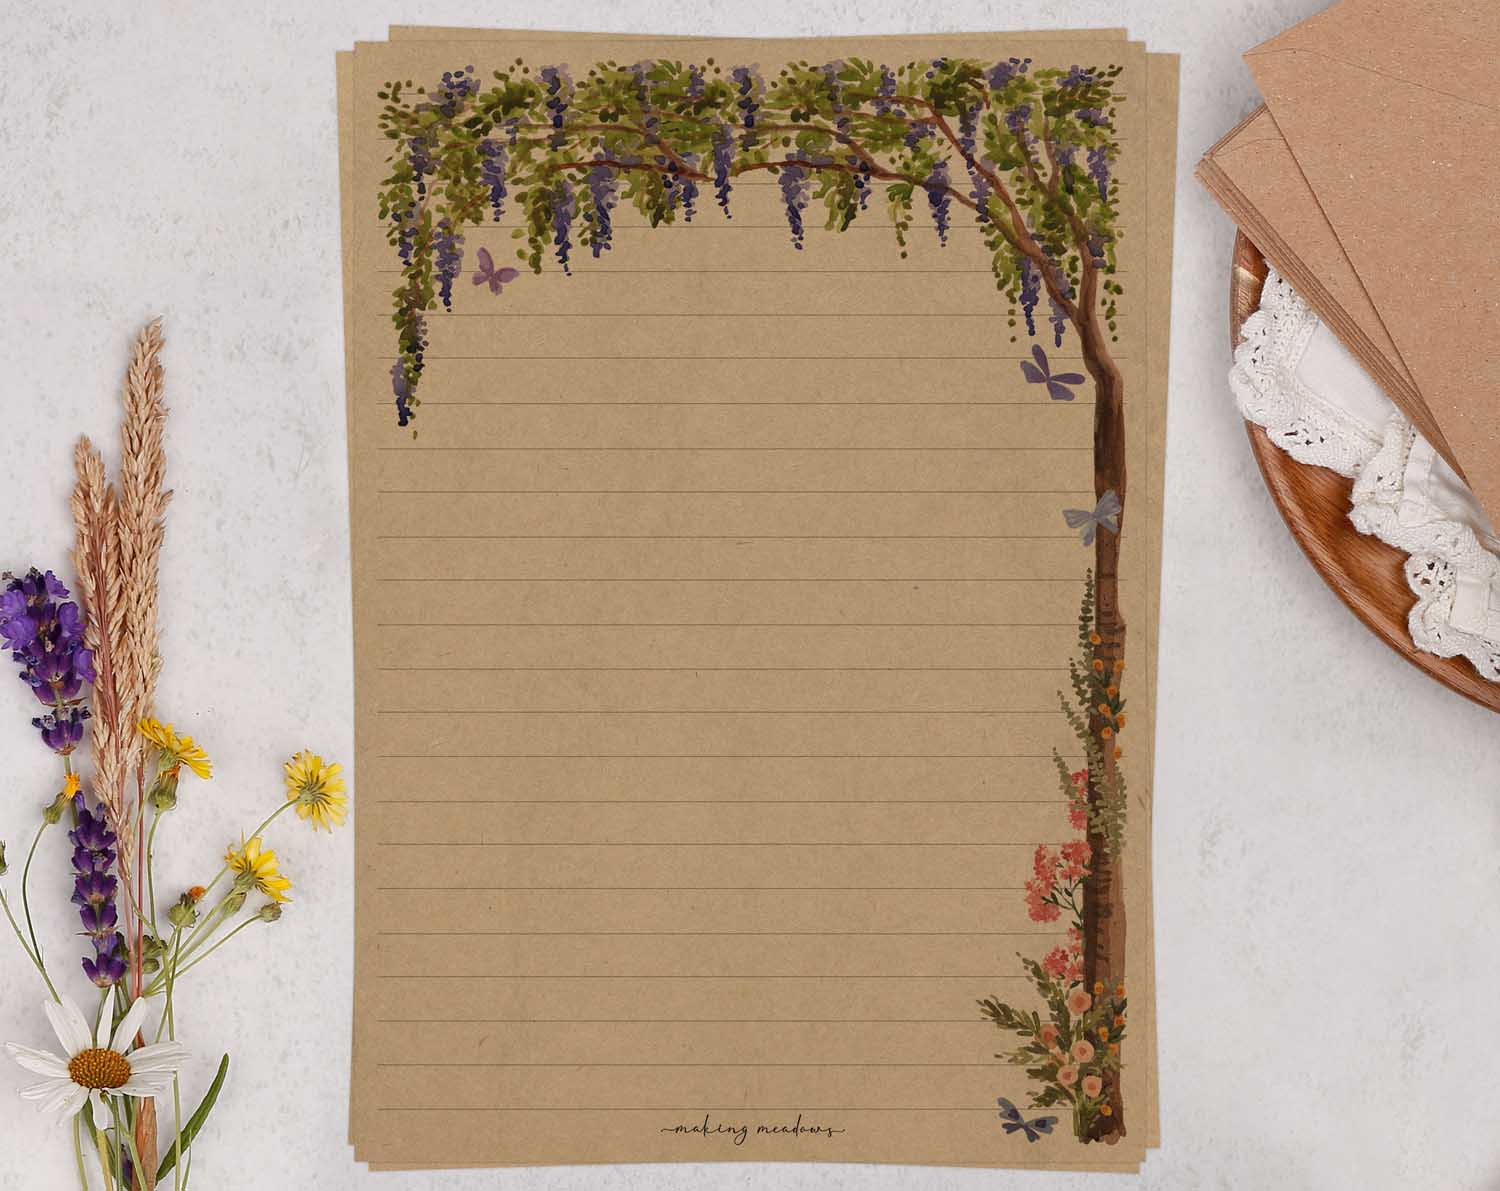 A5 Kraft letter writing paper sheets with a beautiful wisteria design.